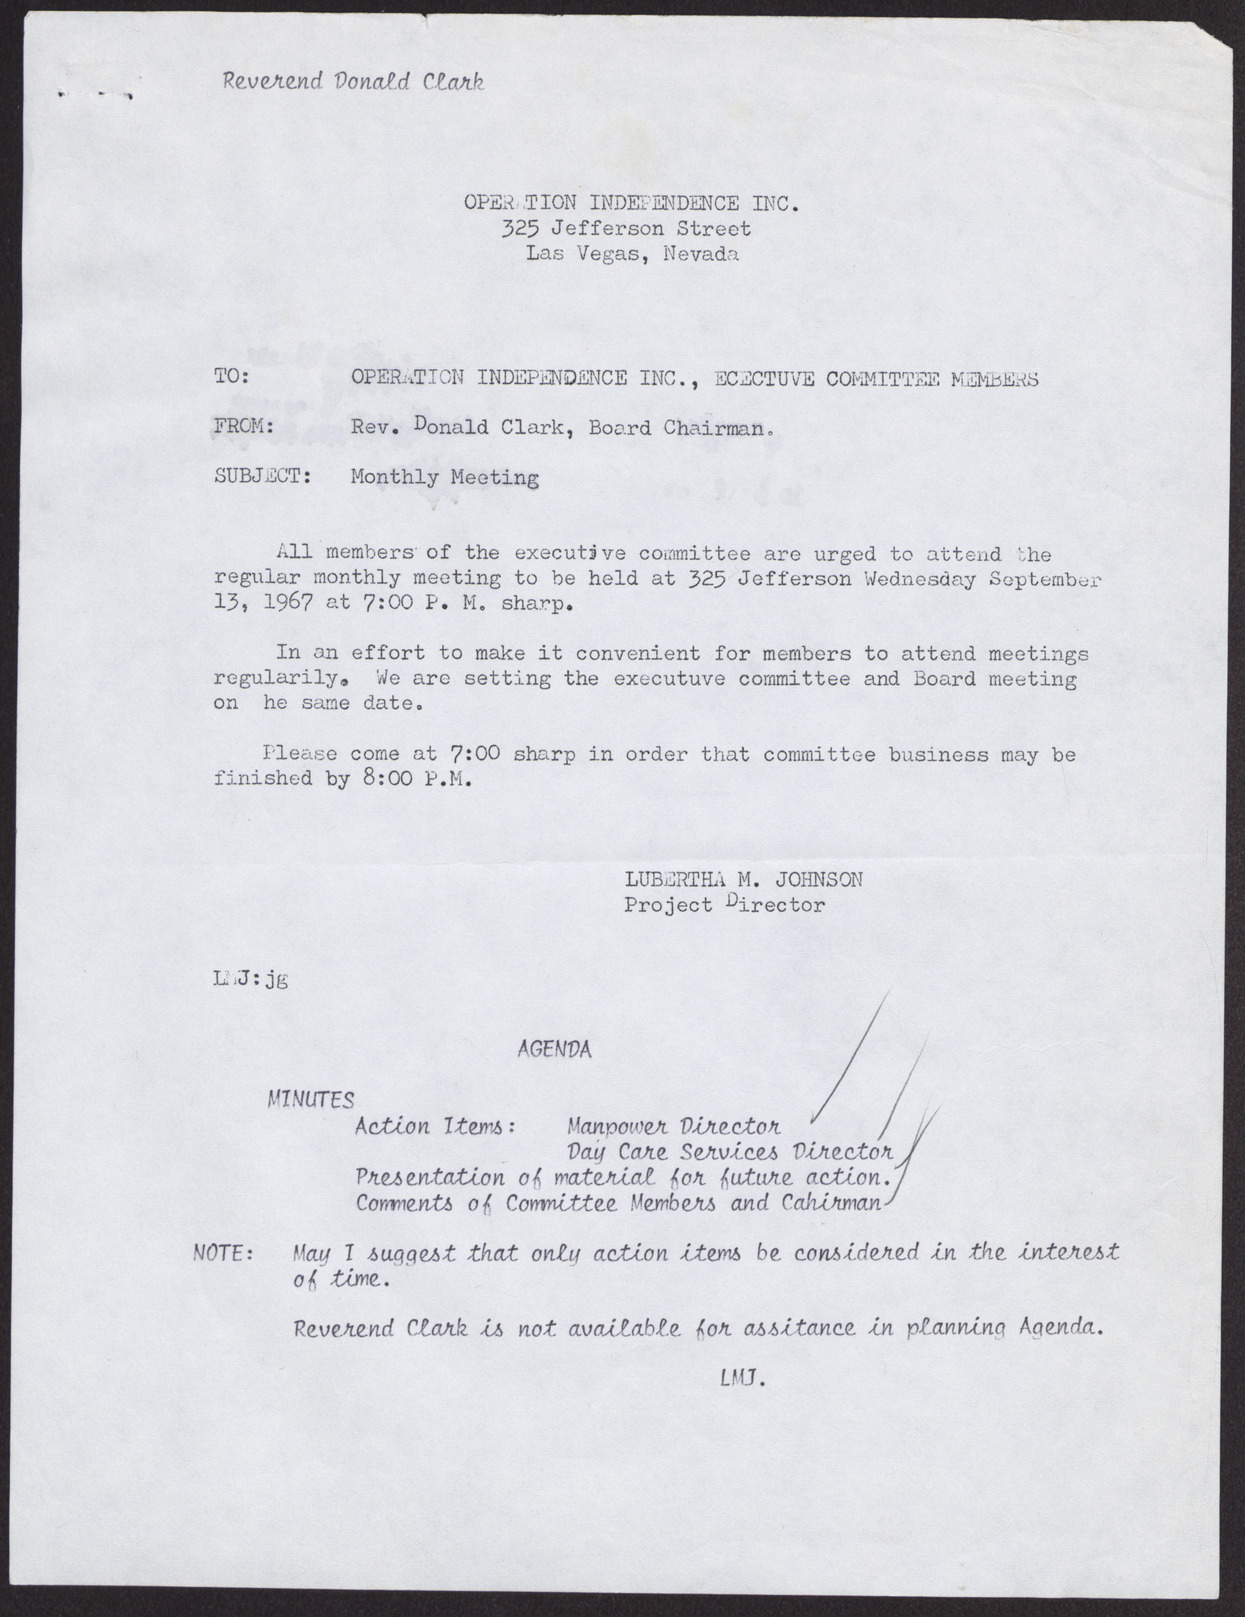 Letter to Operation Independence Inc., Executive Committee Members from Rev. Donald Clark, no date